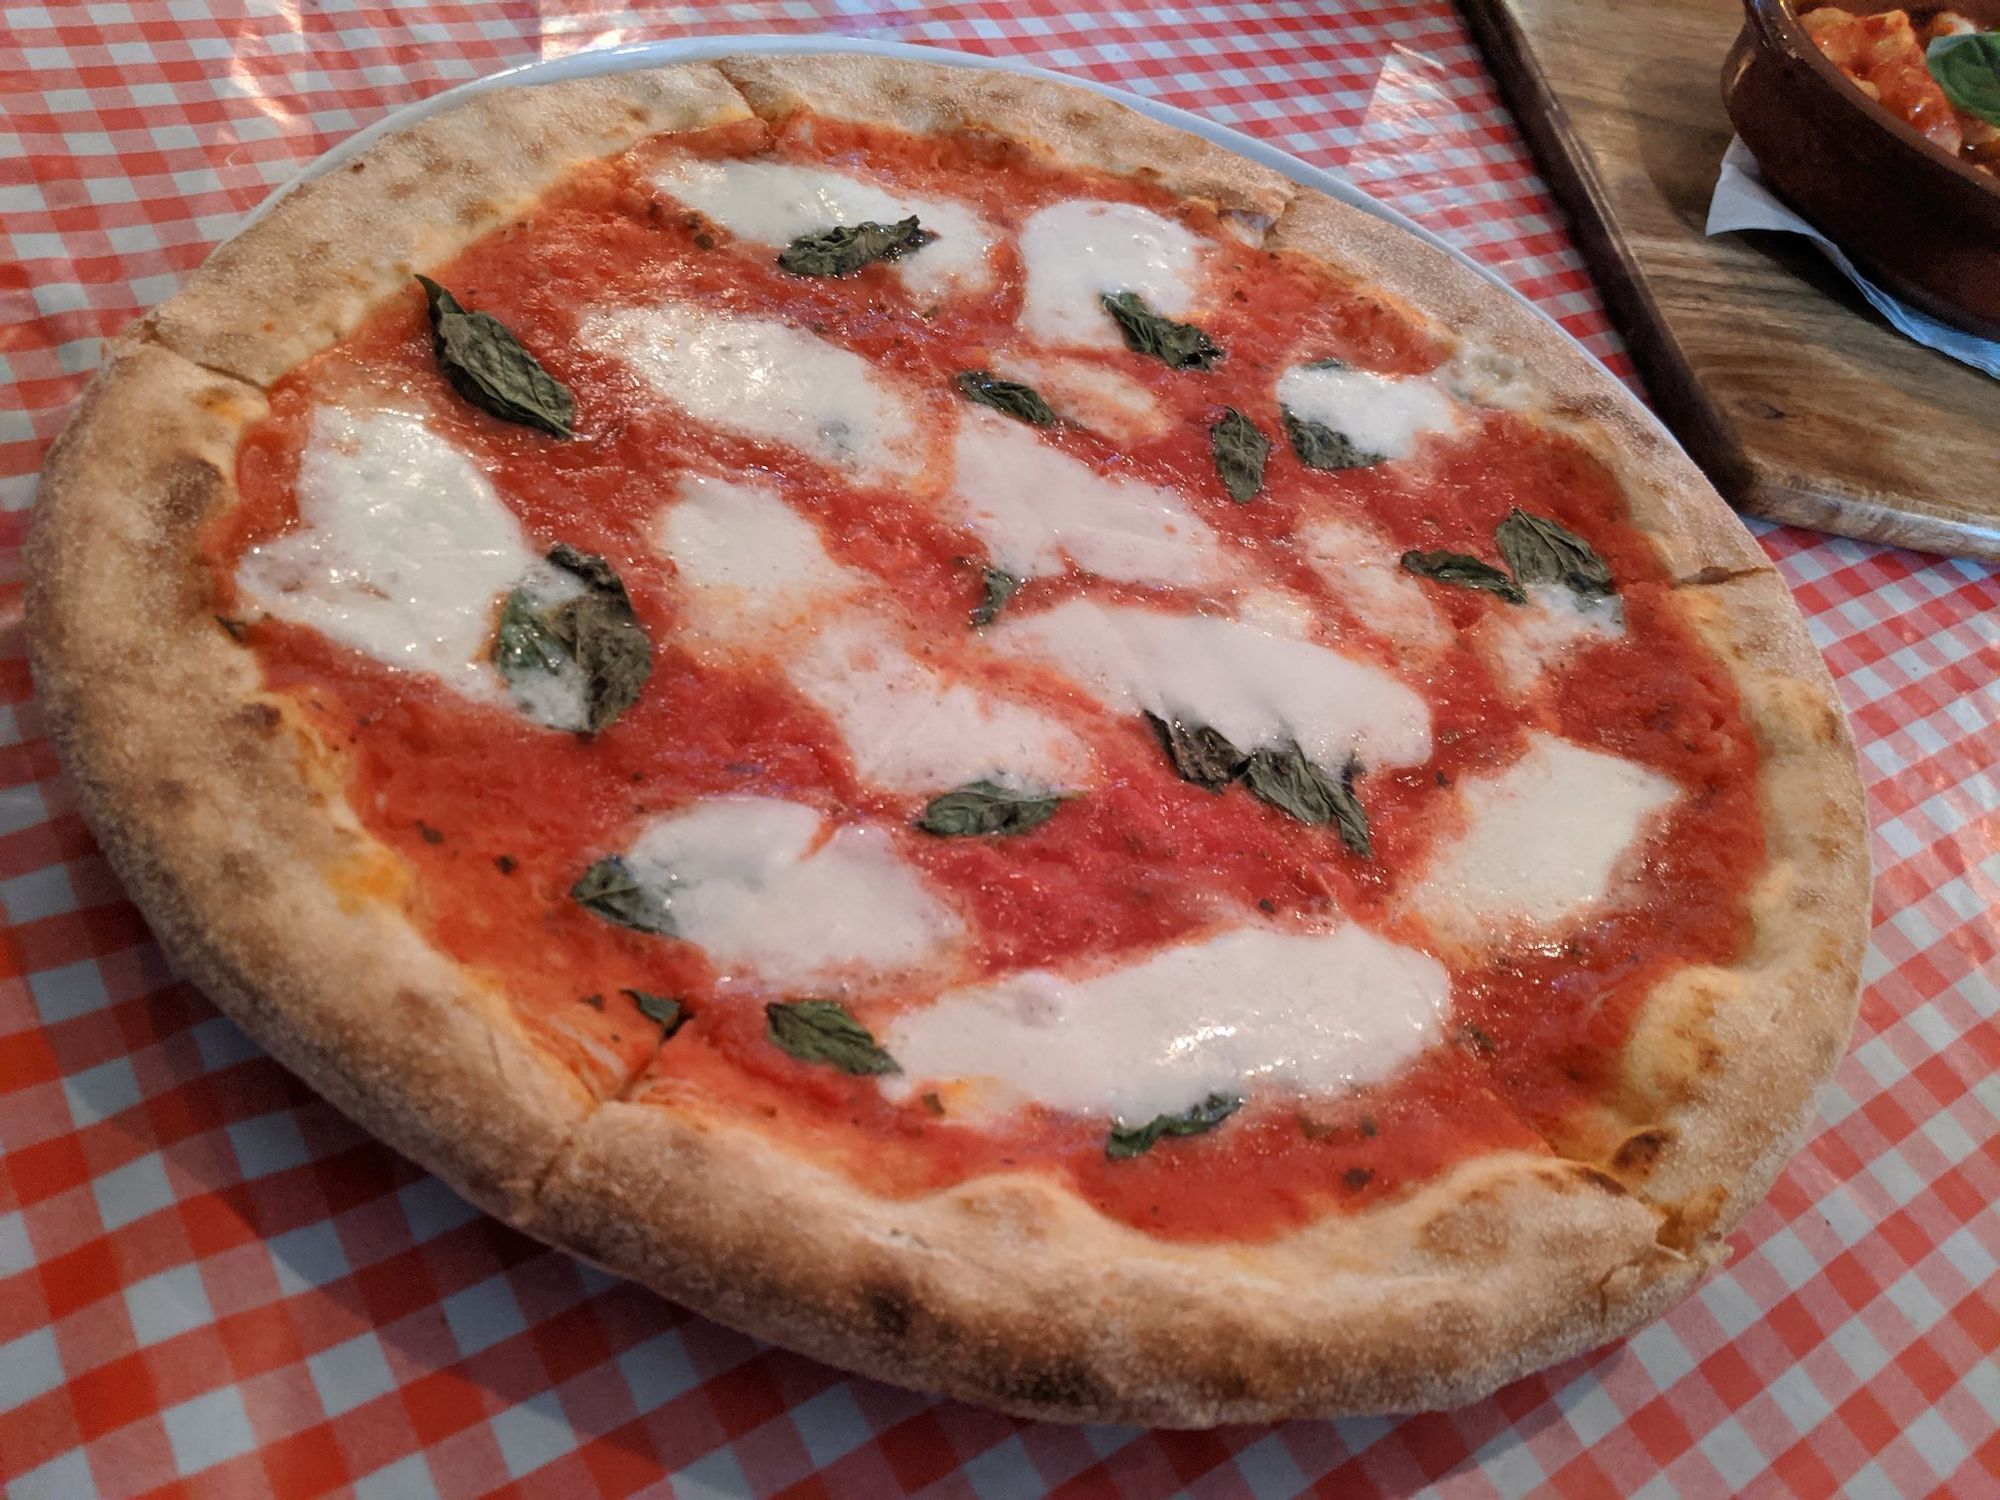 Margherita Pizza on chequered tablecloth. Generous cheese and puffy crust.